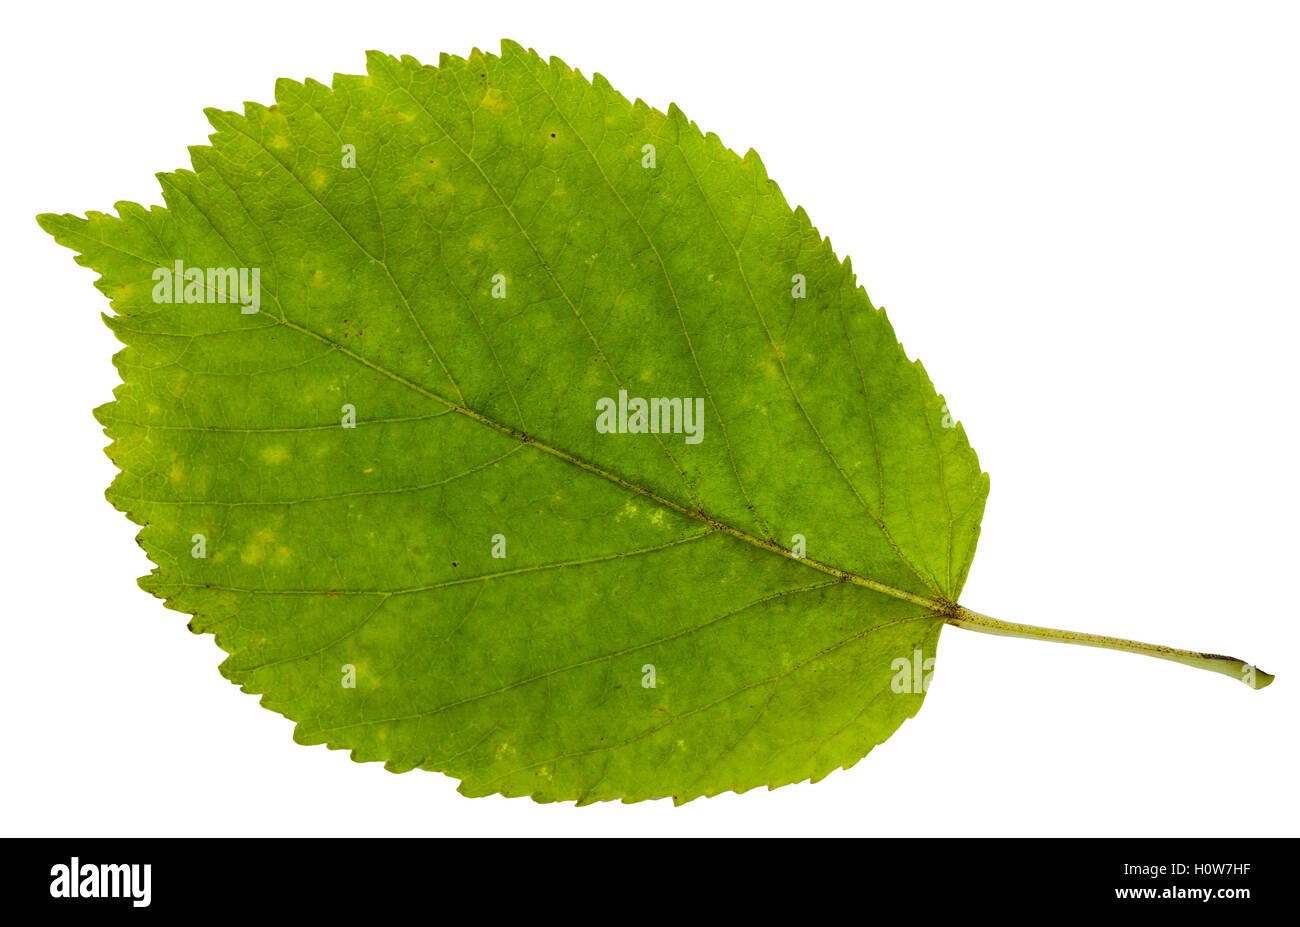 green leaf of ash-leaved maple tree (Acer negundo, Box elder, boxelder maple, ash-leaved maple, maple ash) isolated on white bac Stock Photo